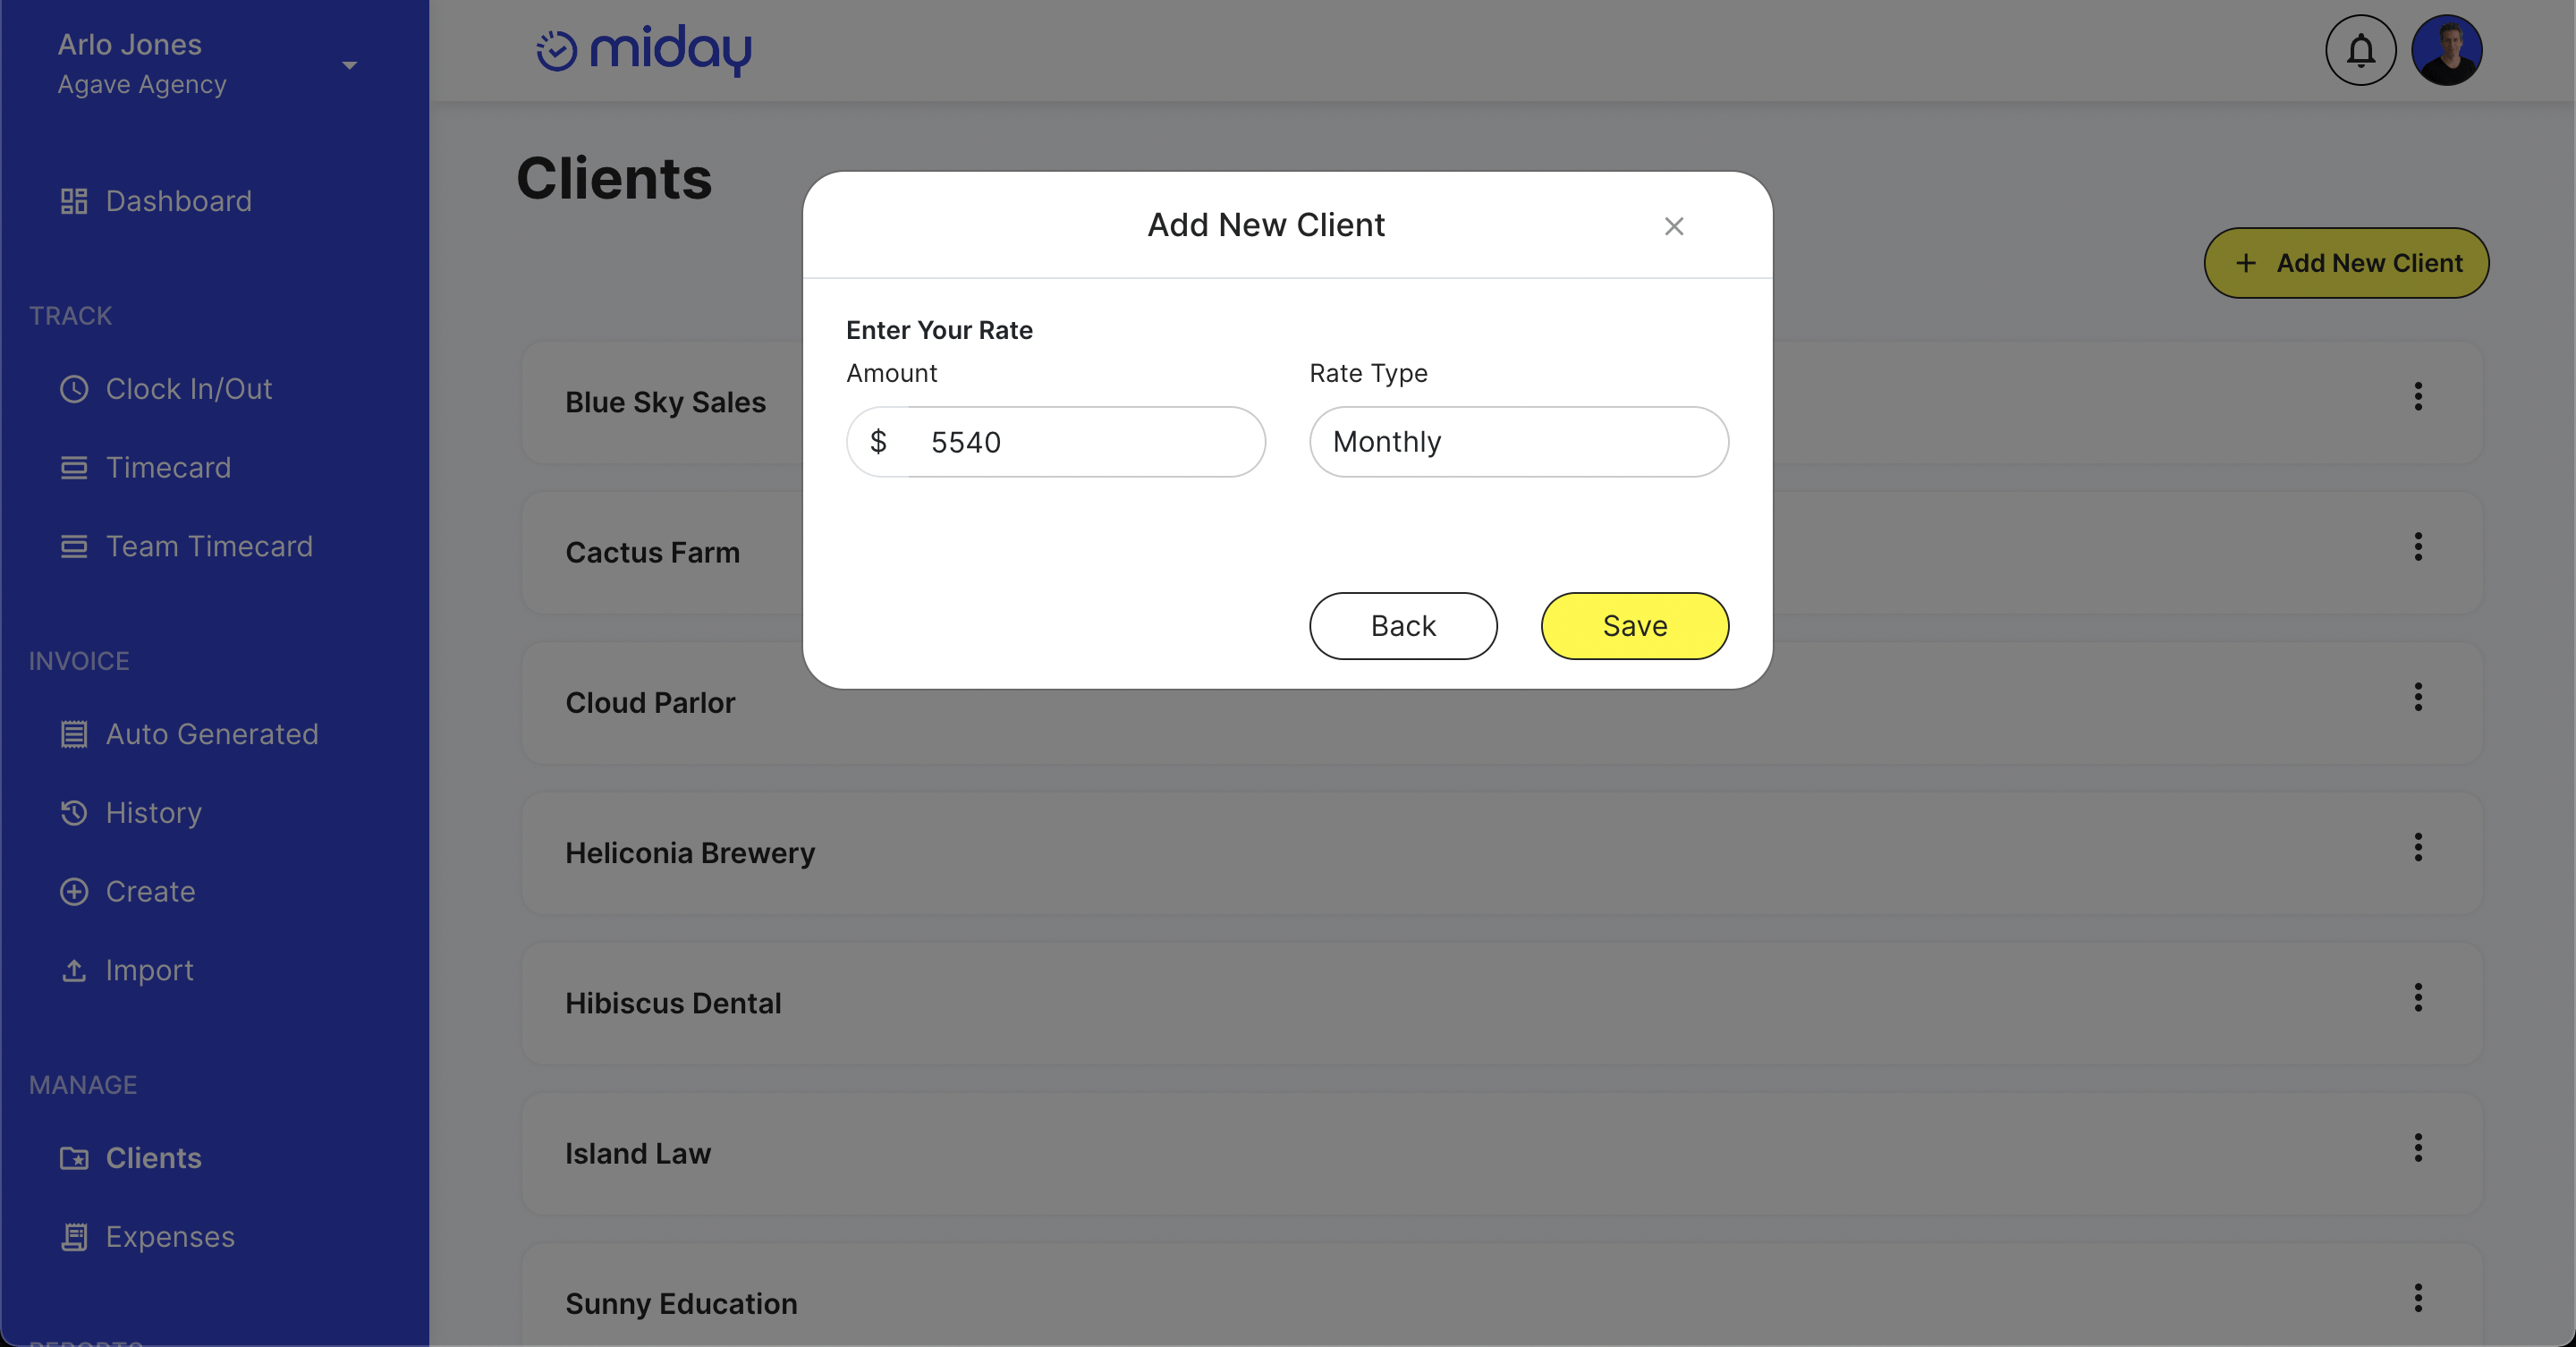 Screenshot of the fifth miday prompt asking the user to enter a billable rate for the client.